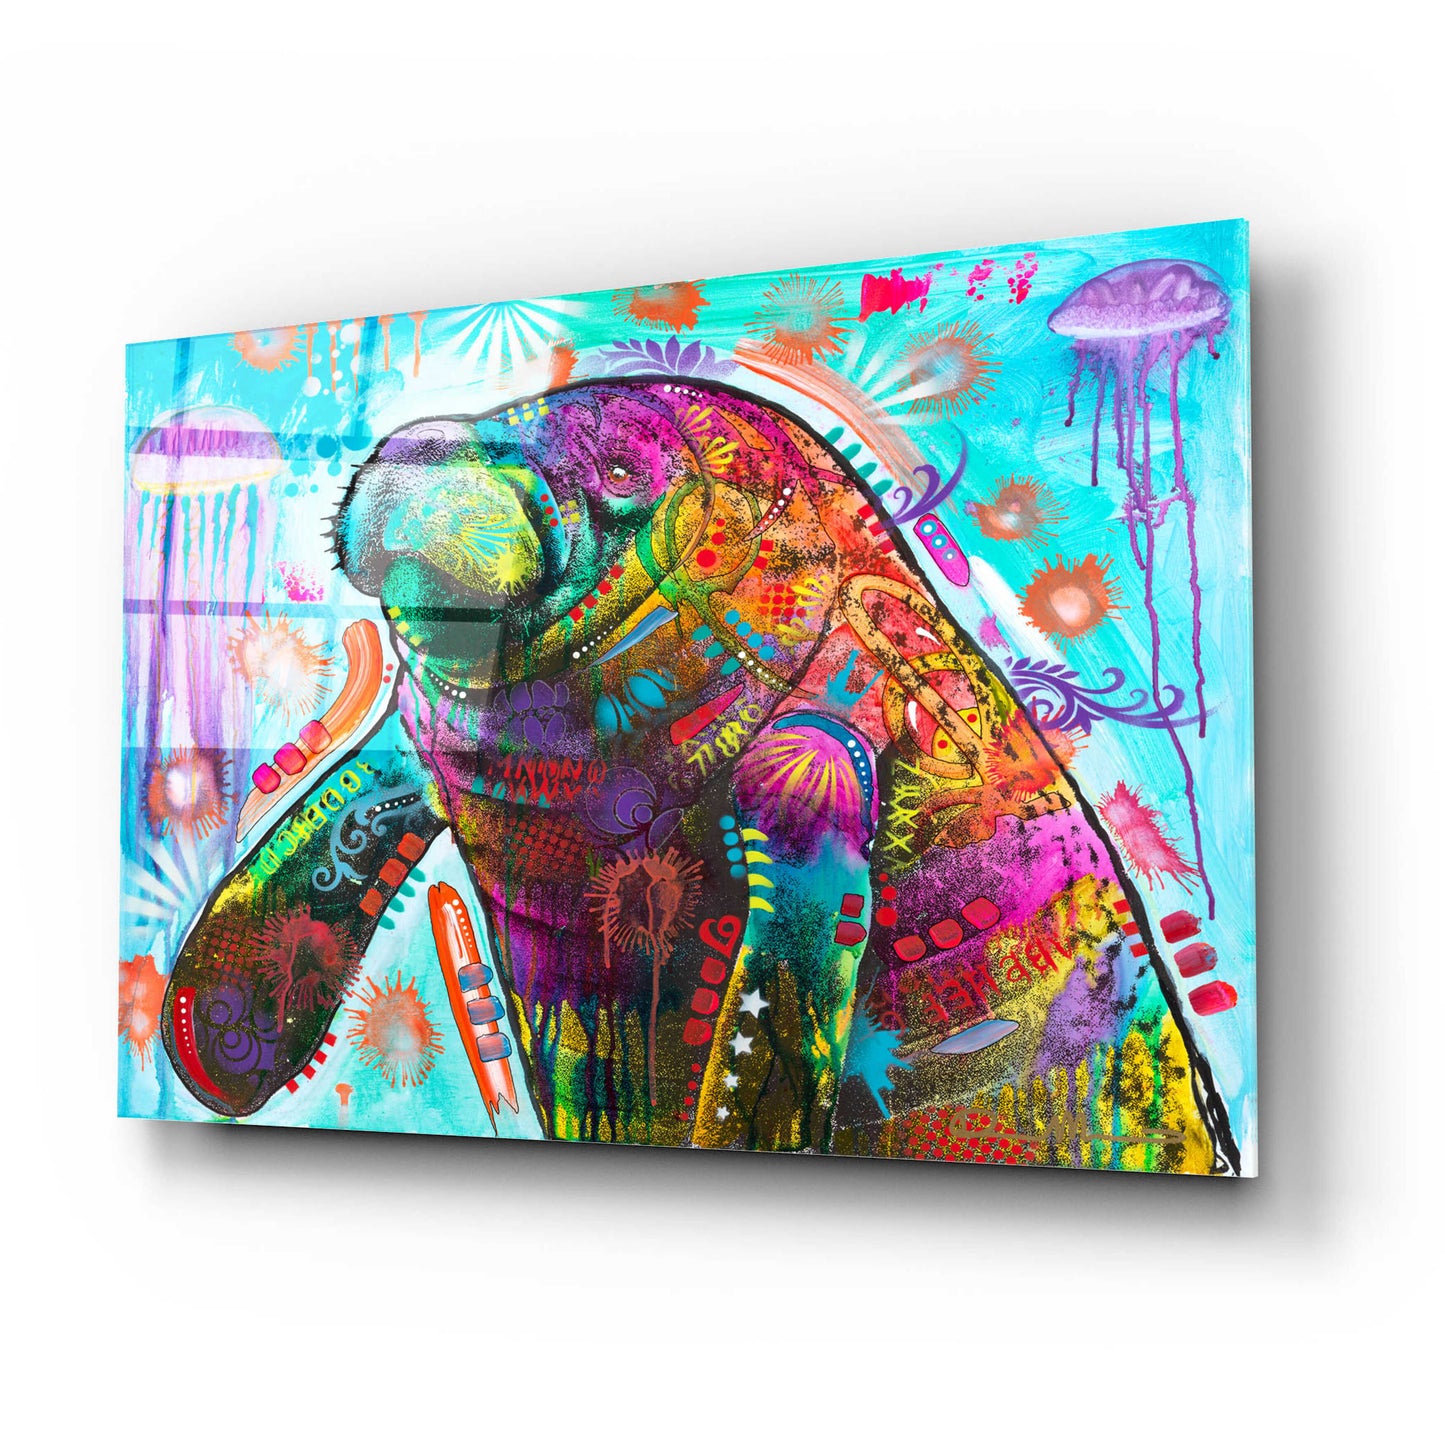 Epic Art 'Manatee' by Dean Russo, Acrylic Glass Wall Art,24x16